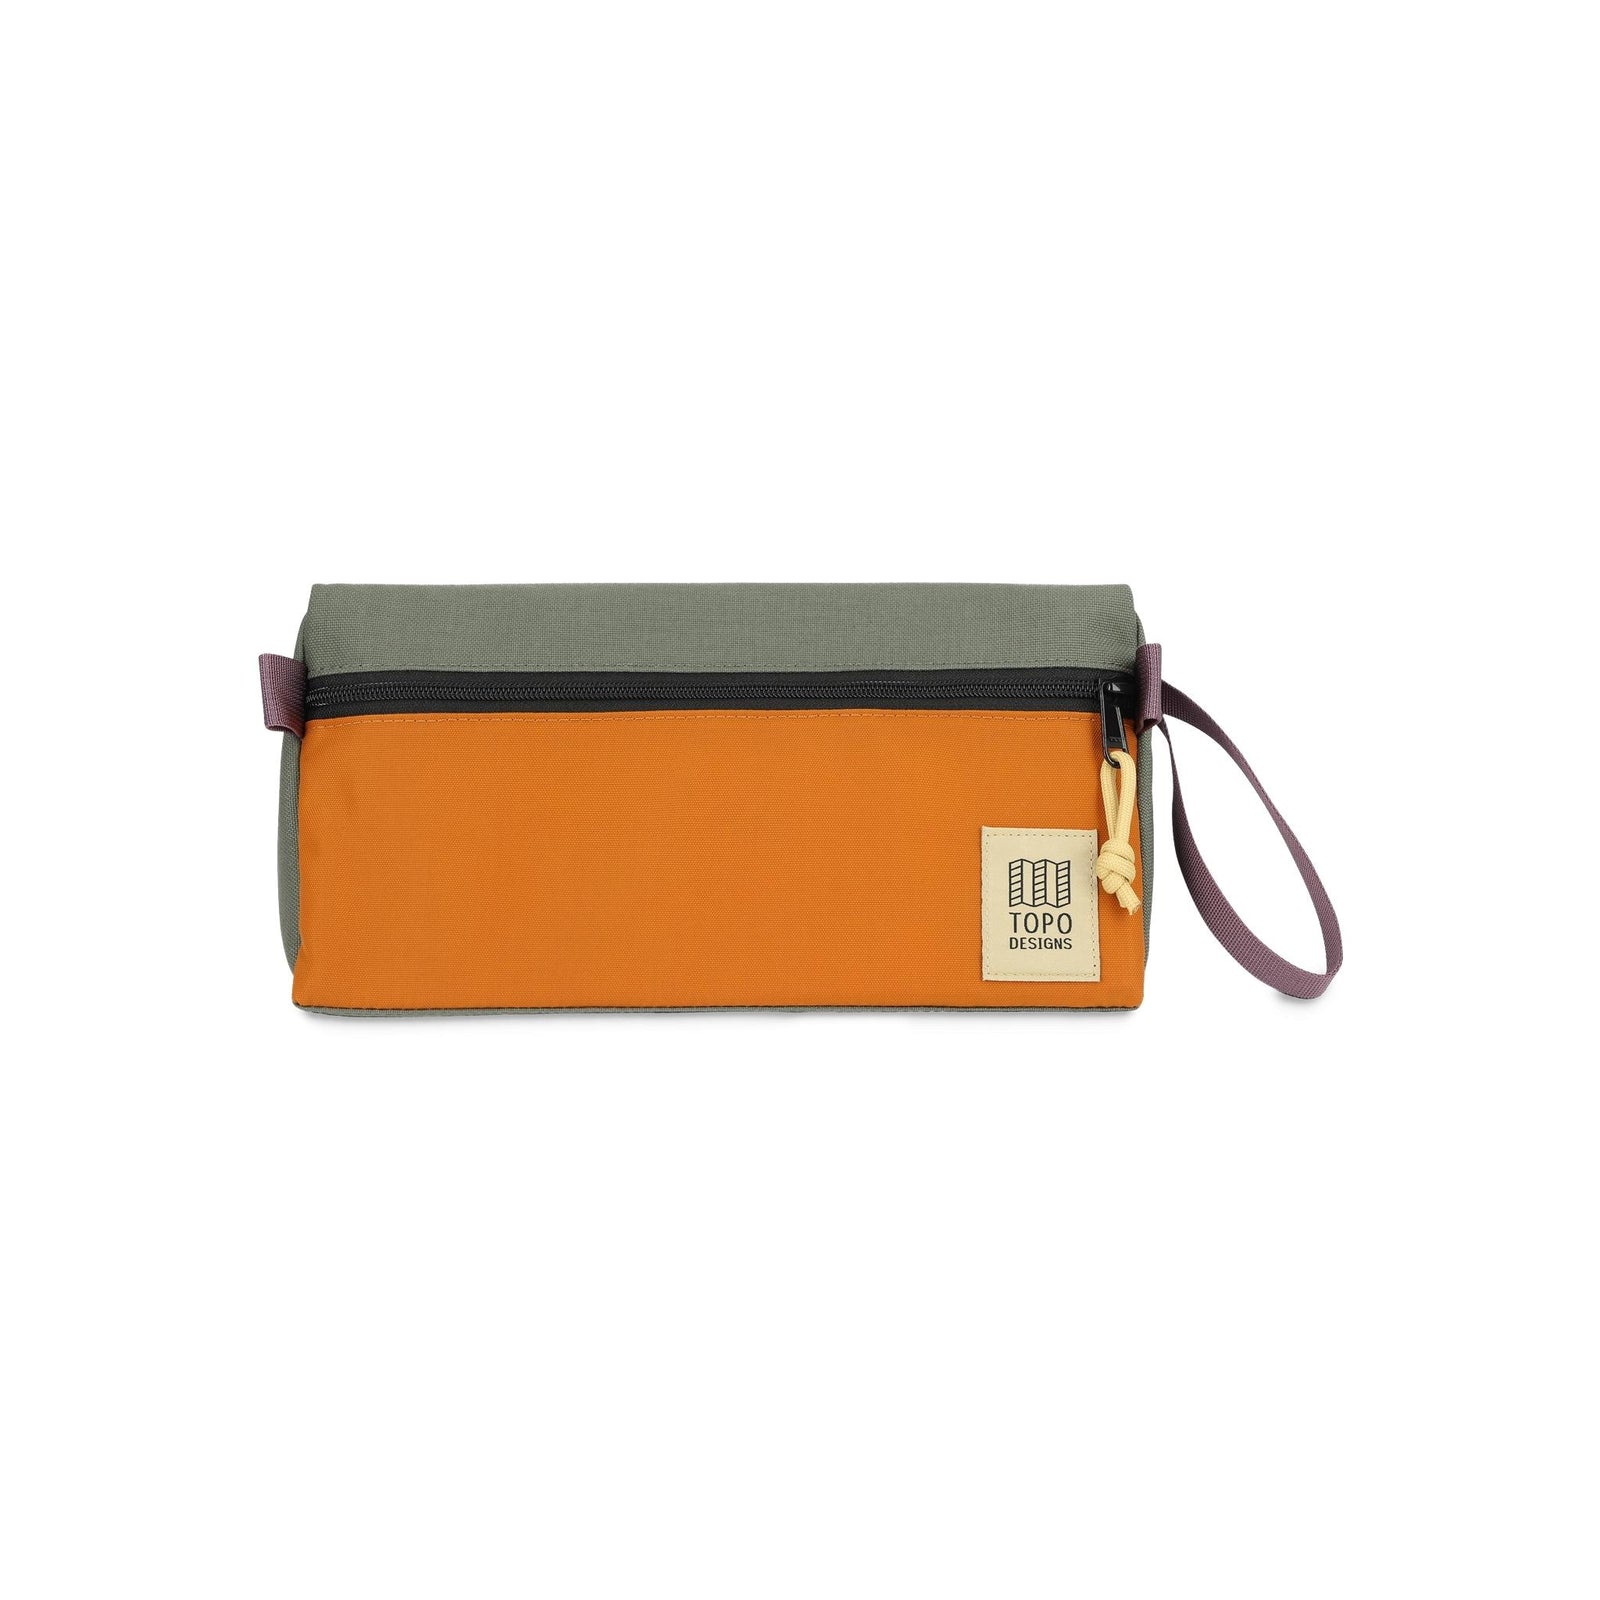 Front View of Topo Designs Dopp Kit in "Beetle / Spice"